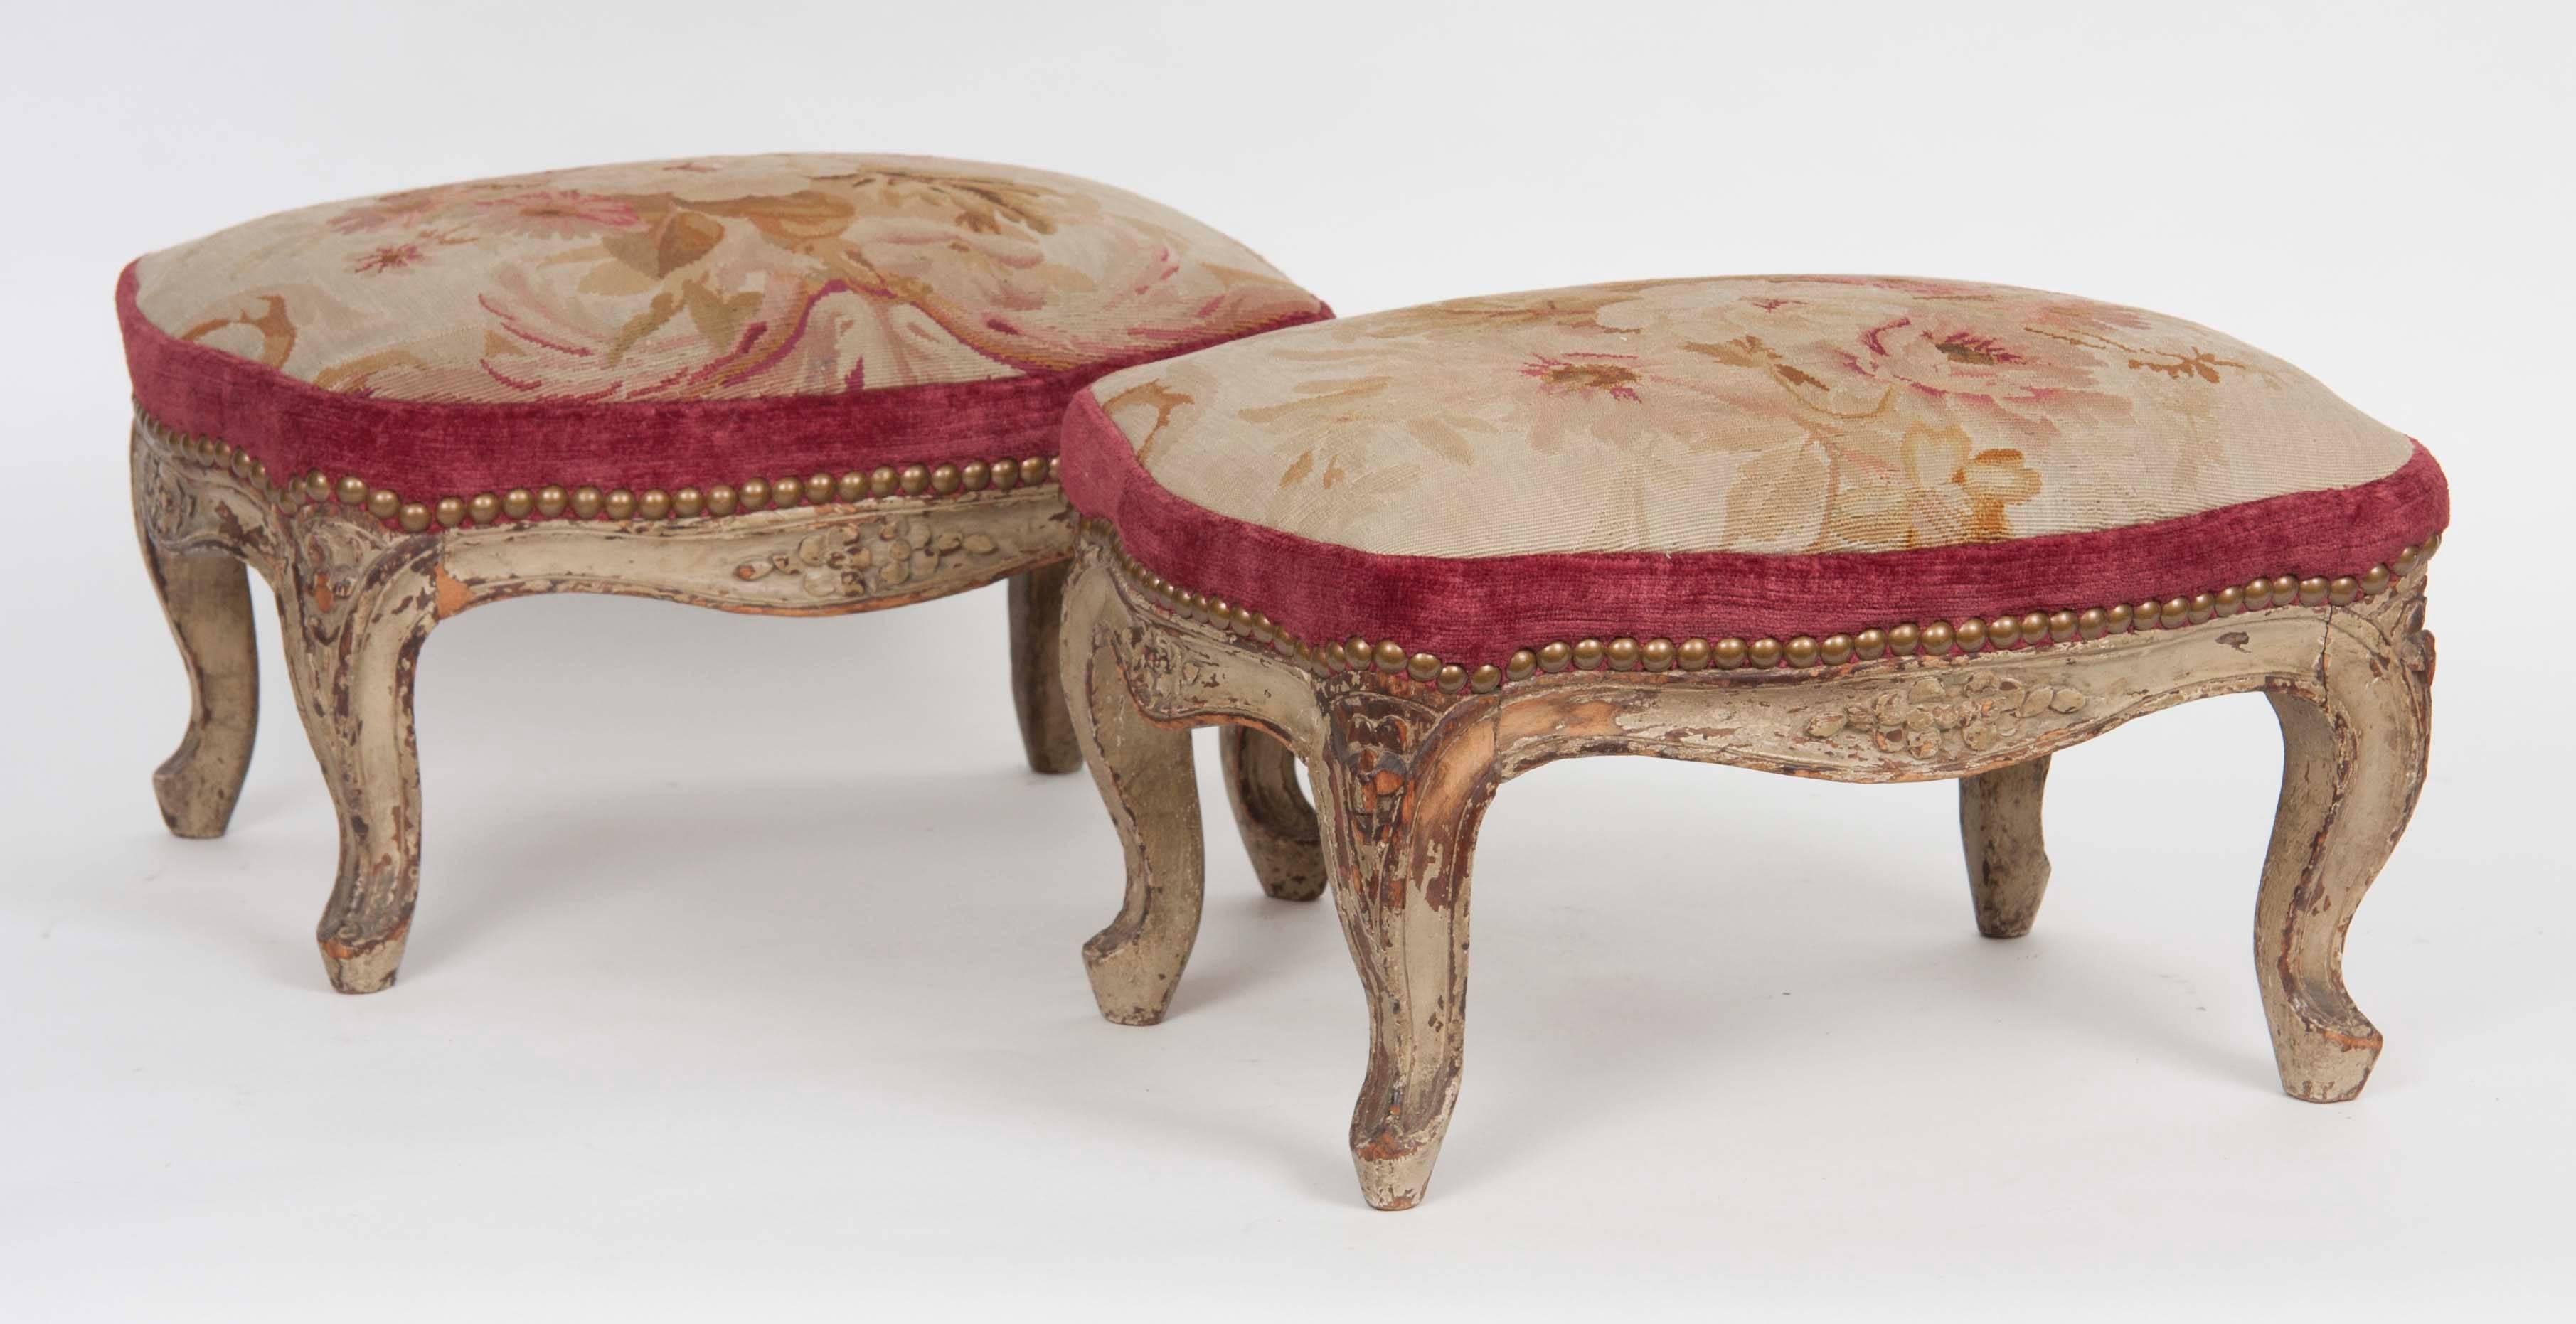 Pair of lacquer painted Aubusson tapestry footstools,
France, 18th century.
 